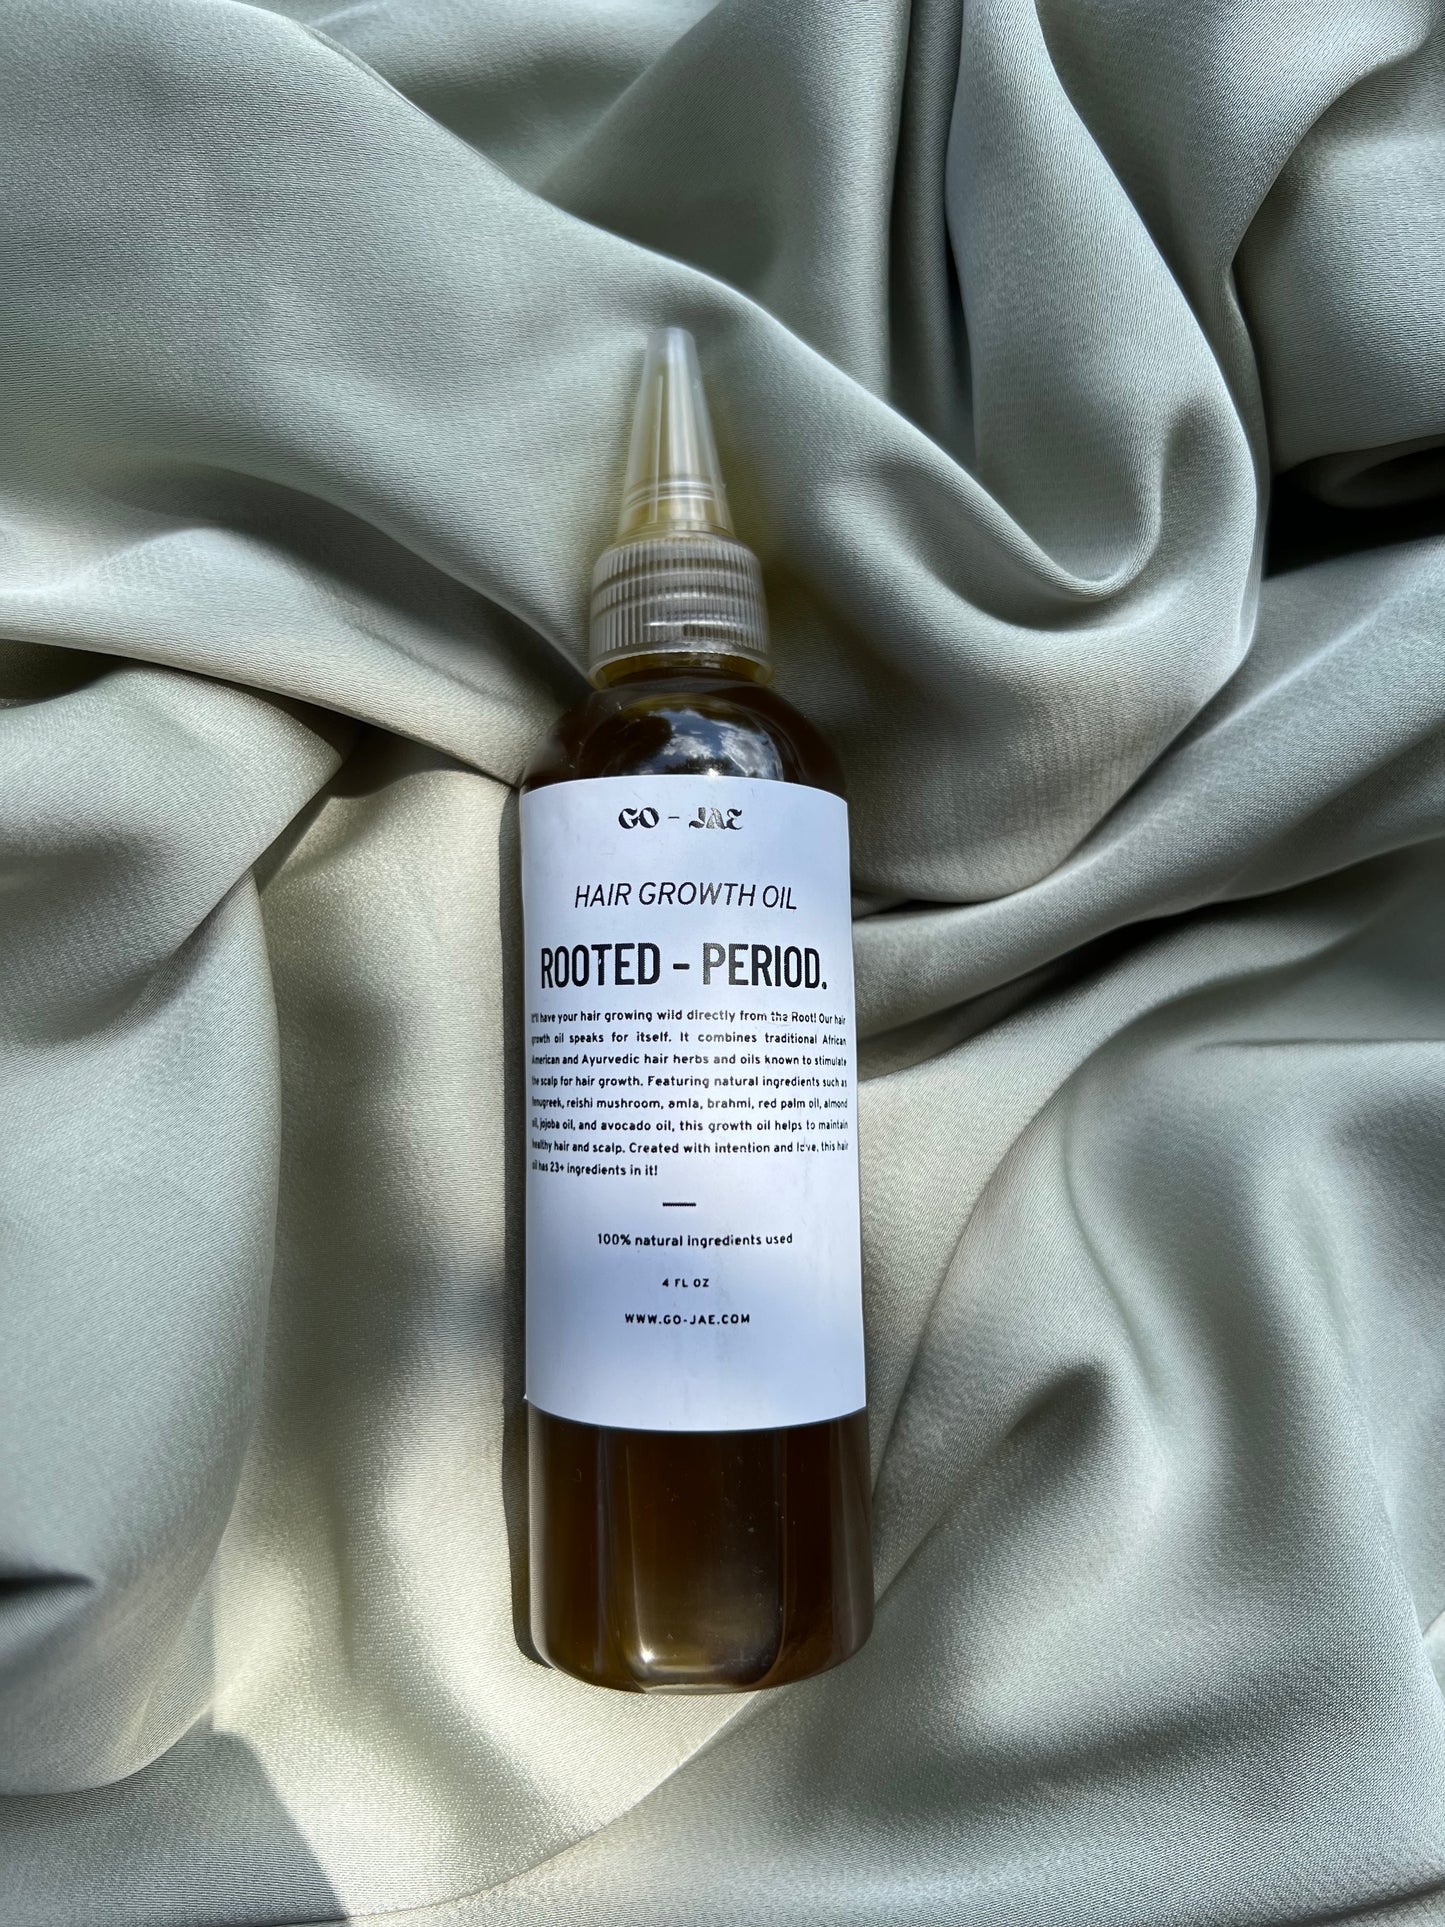 Rooted - Period! Hair Growth Oil